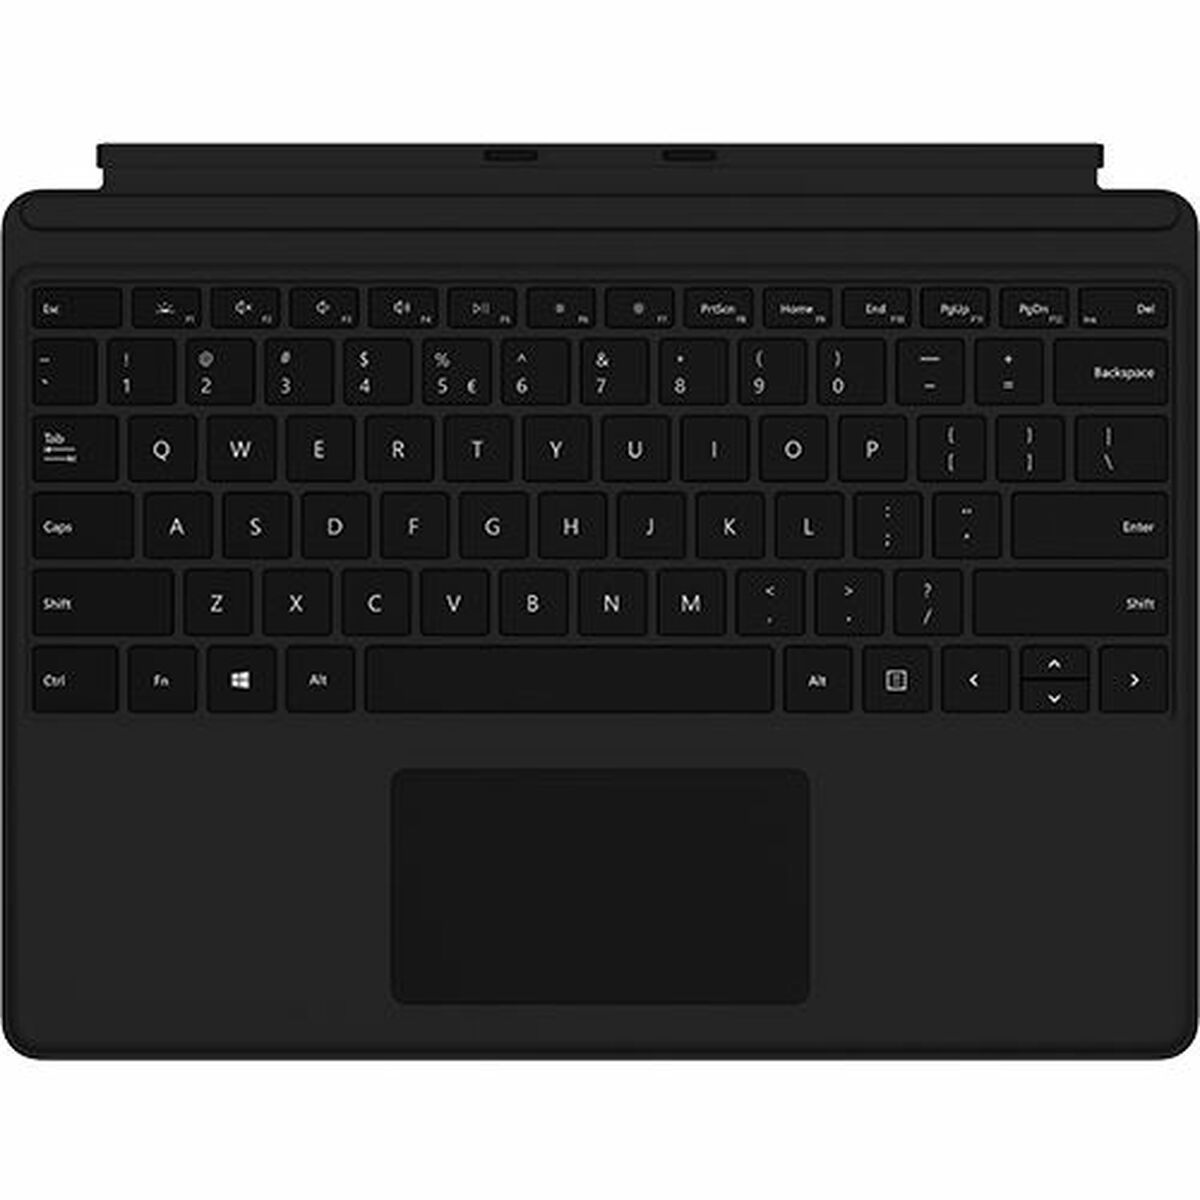 Bluetooth Keyboard Microsoft QJW-00011 Qwerty Portuguese, Microsoft, Computing, Accessories, bluetooth-keyboard-microsoft-qjw-00011-qwerty-portuguese, :QWERTY, Brand_Microsoft, category-reference-2609, category-reference-2642, category-reference-2646, category-reference-t-19685, category-reference-t-19908, category-reference-t-21345, computers / peripherals, Condition_NEW, office, Price_100 - 200, RiotNook